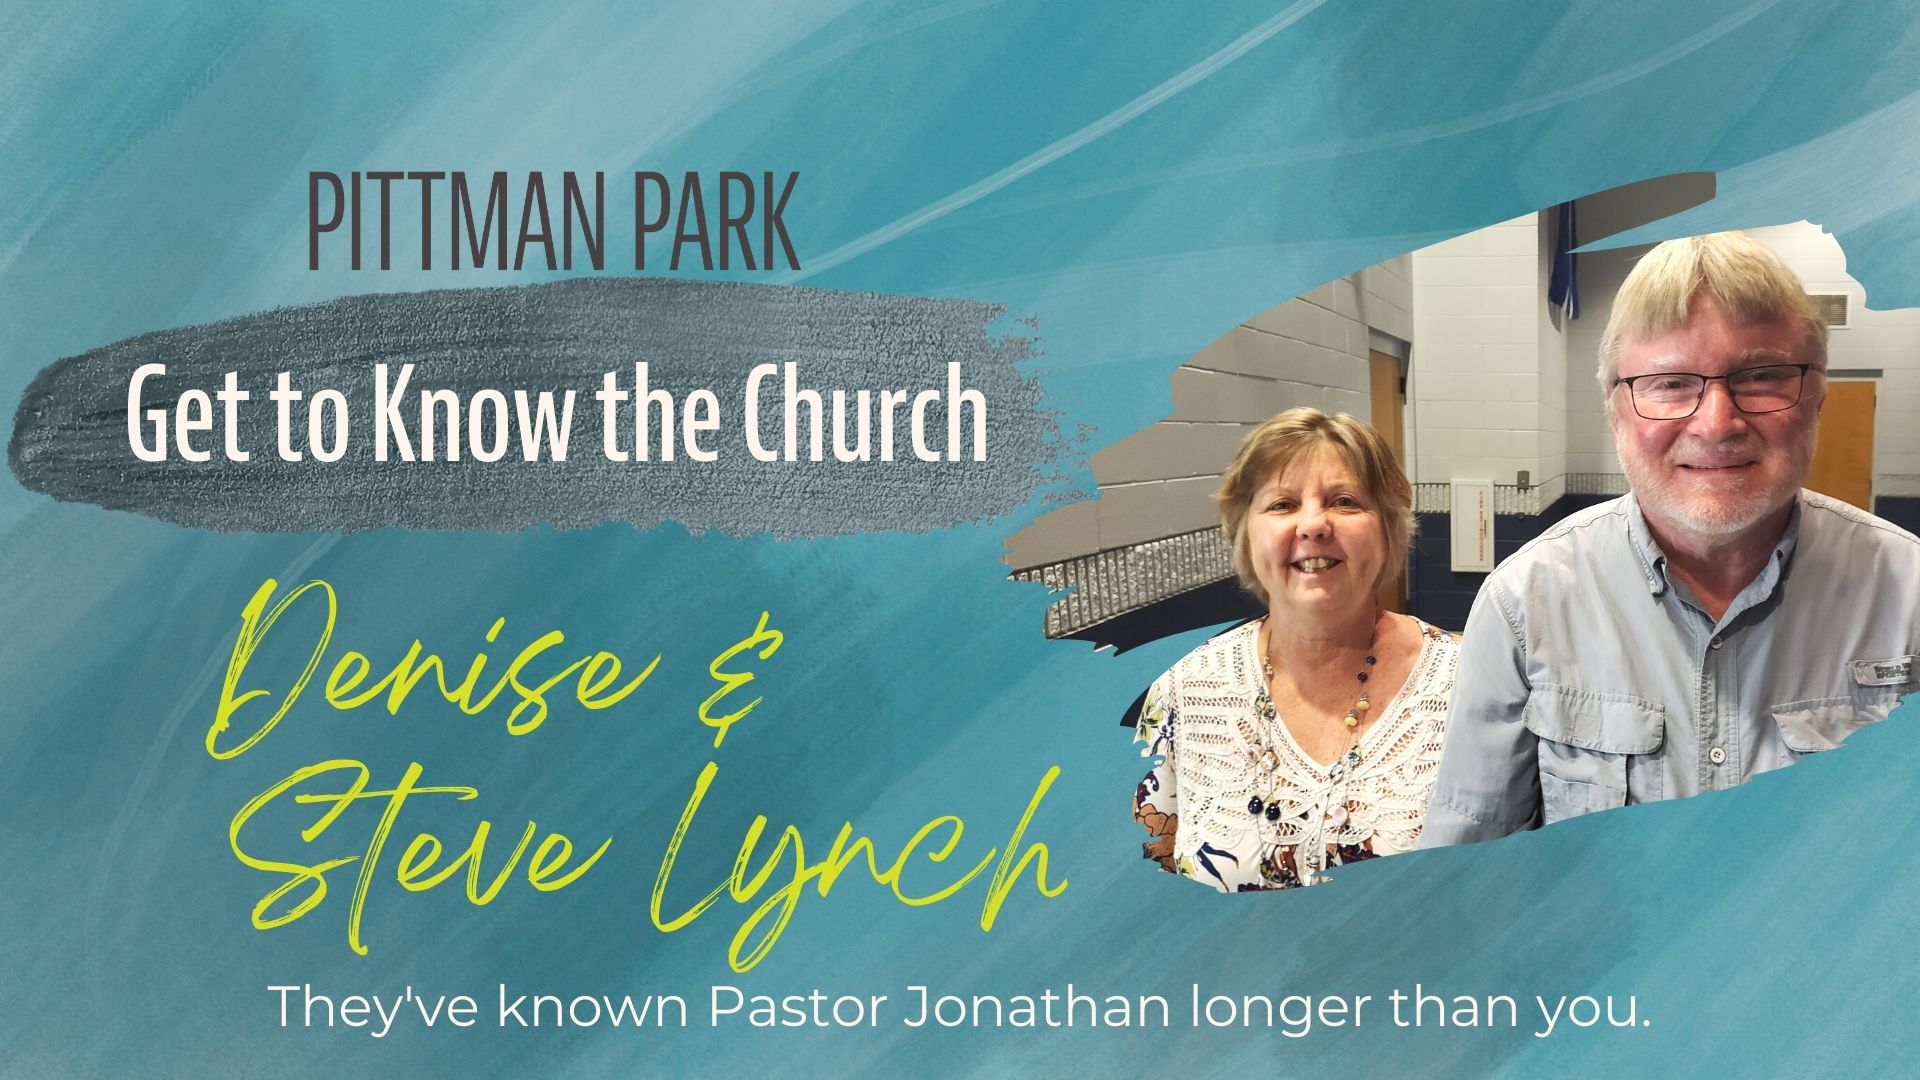 GET TO KNOW THE CHURCH: Steve and Denise Lynch